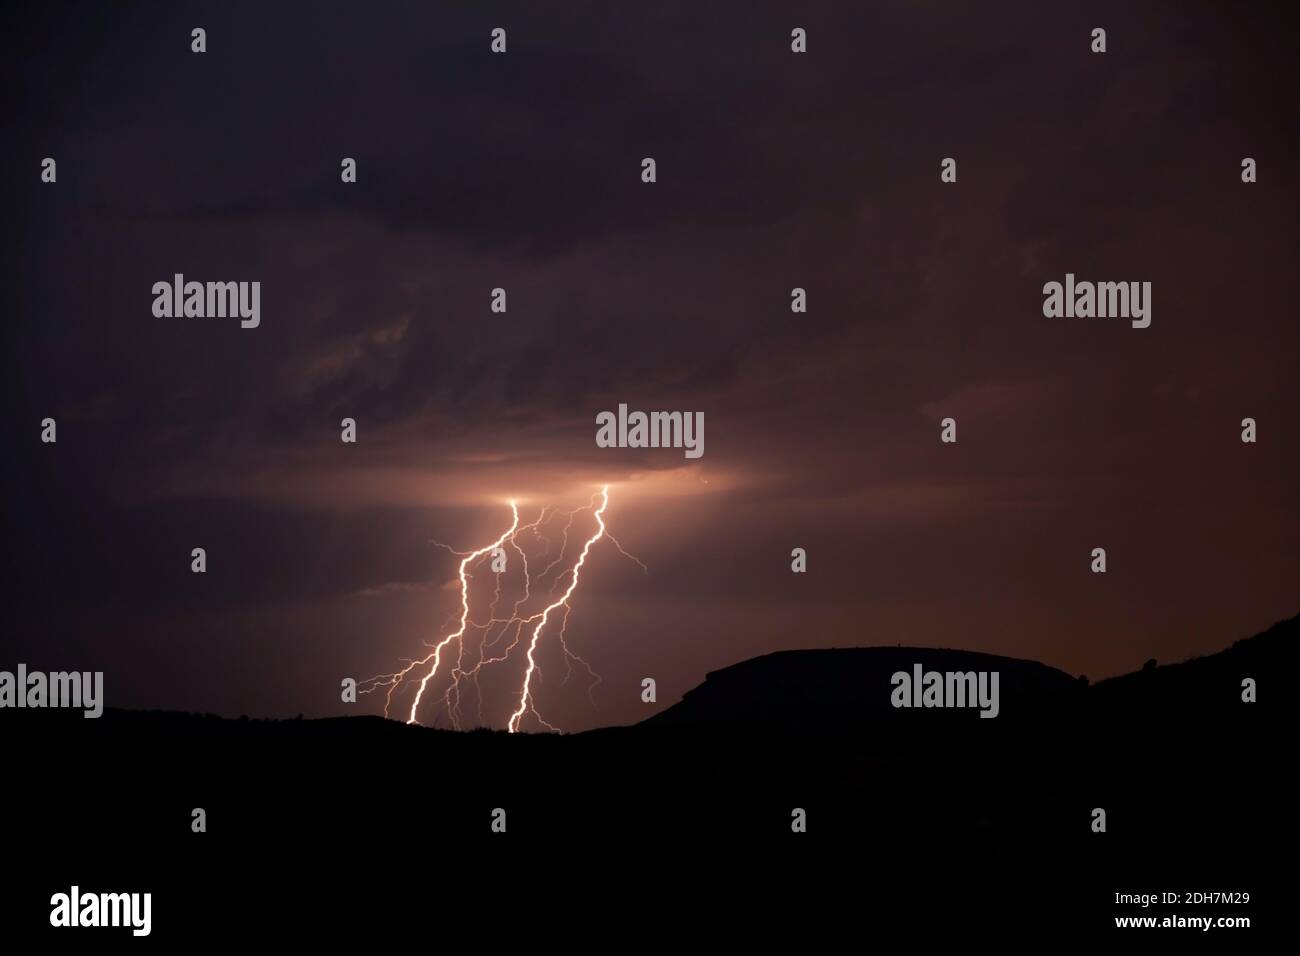 A silhouette shot of mountains with lightning bolts background Stock Photo